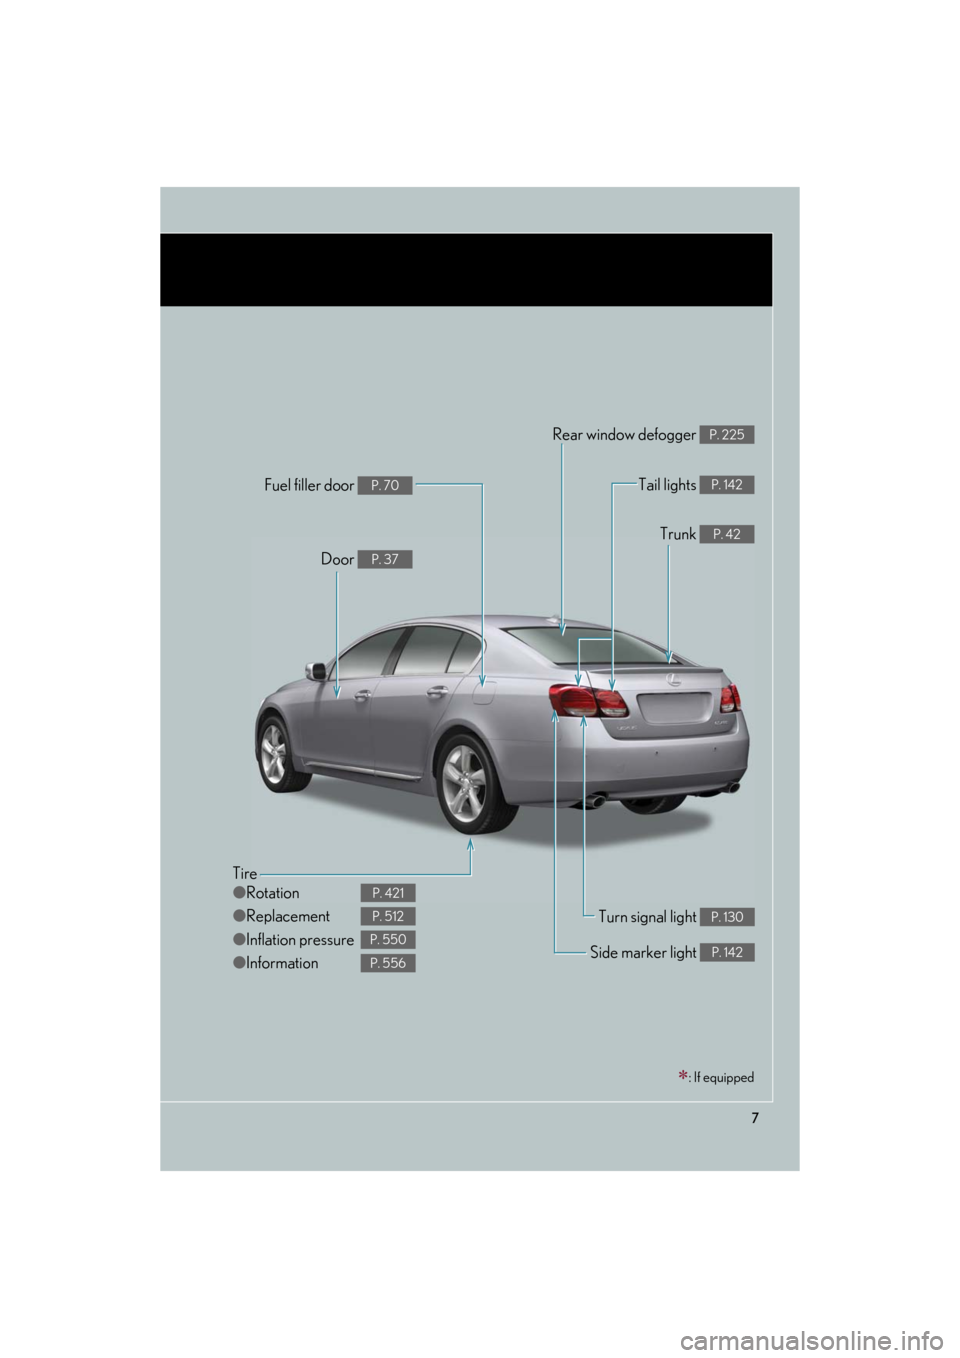 Lexus GS350 2008  Opening, closing and locking the doors and trunk / LEXUS 2008 GS460/350 OWNERS MANUAL (OM30A87U) 7
GS_G_U
May 13, 2008 5:14 pm
Tire
●Rotation
● Replacement
● Inflation pressure
● Information
P. 421
P. 512
P. 550
P. 556
Tail lights P. 142
Side marker light P. 142
Trunk P. 42
Rear window de